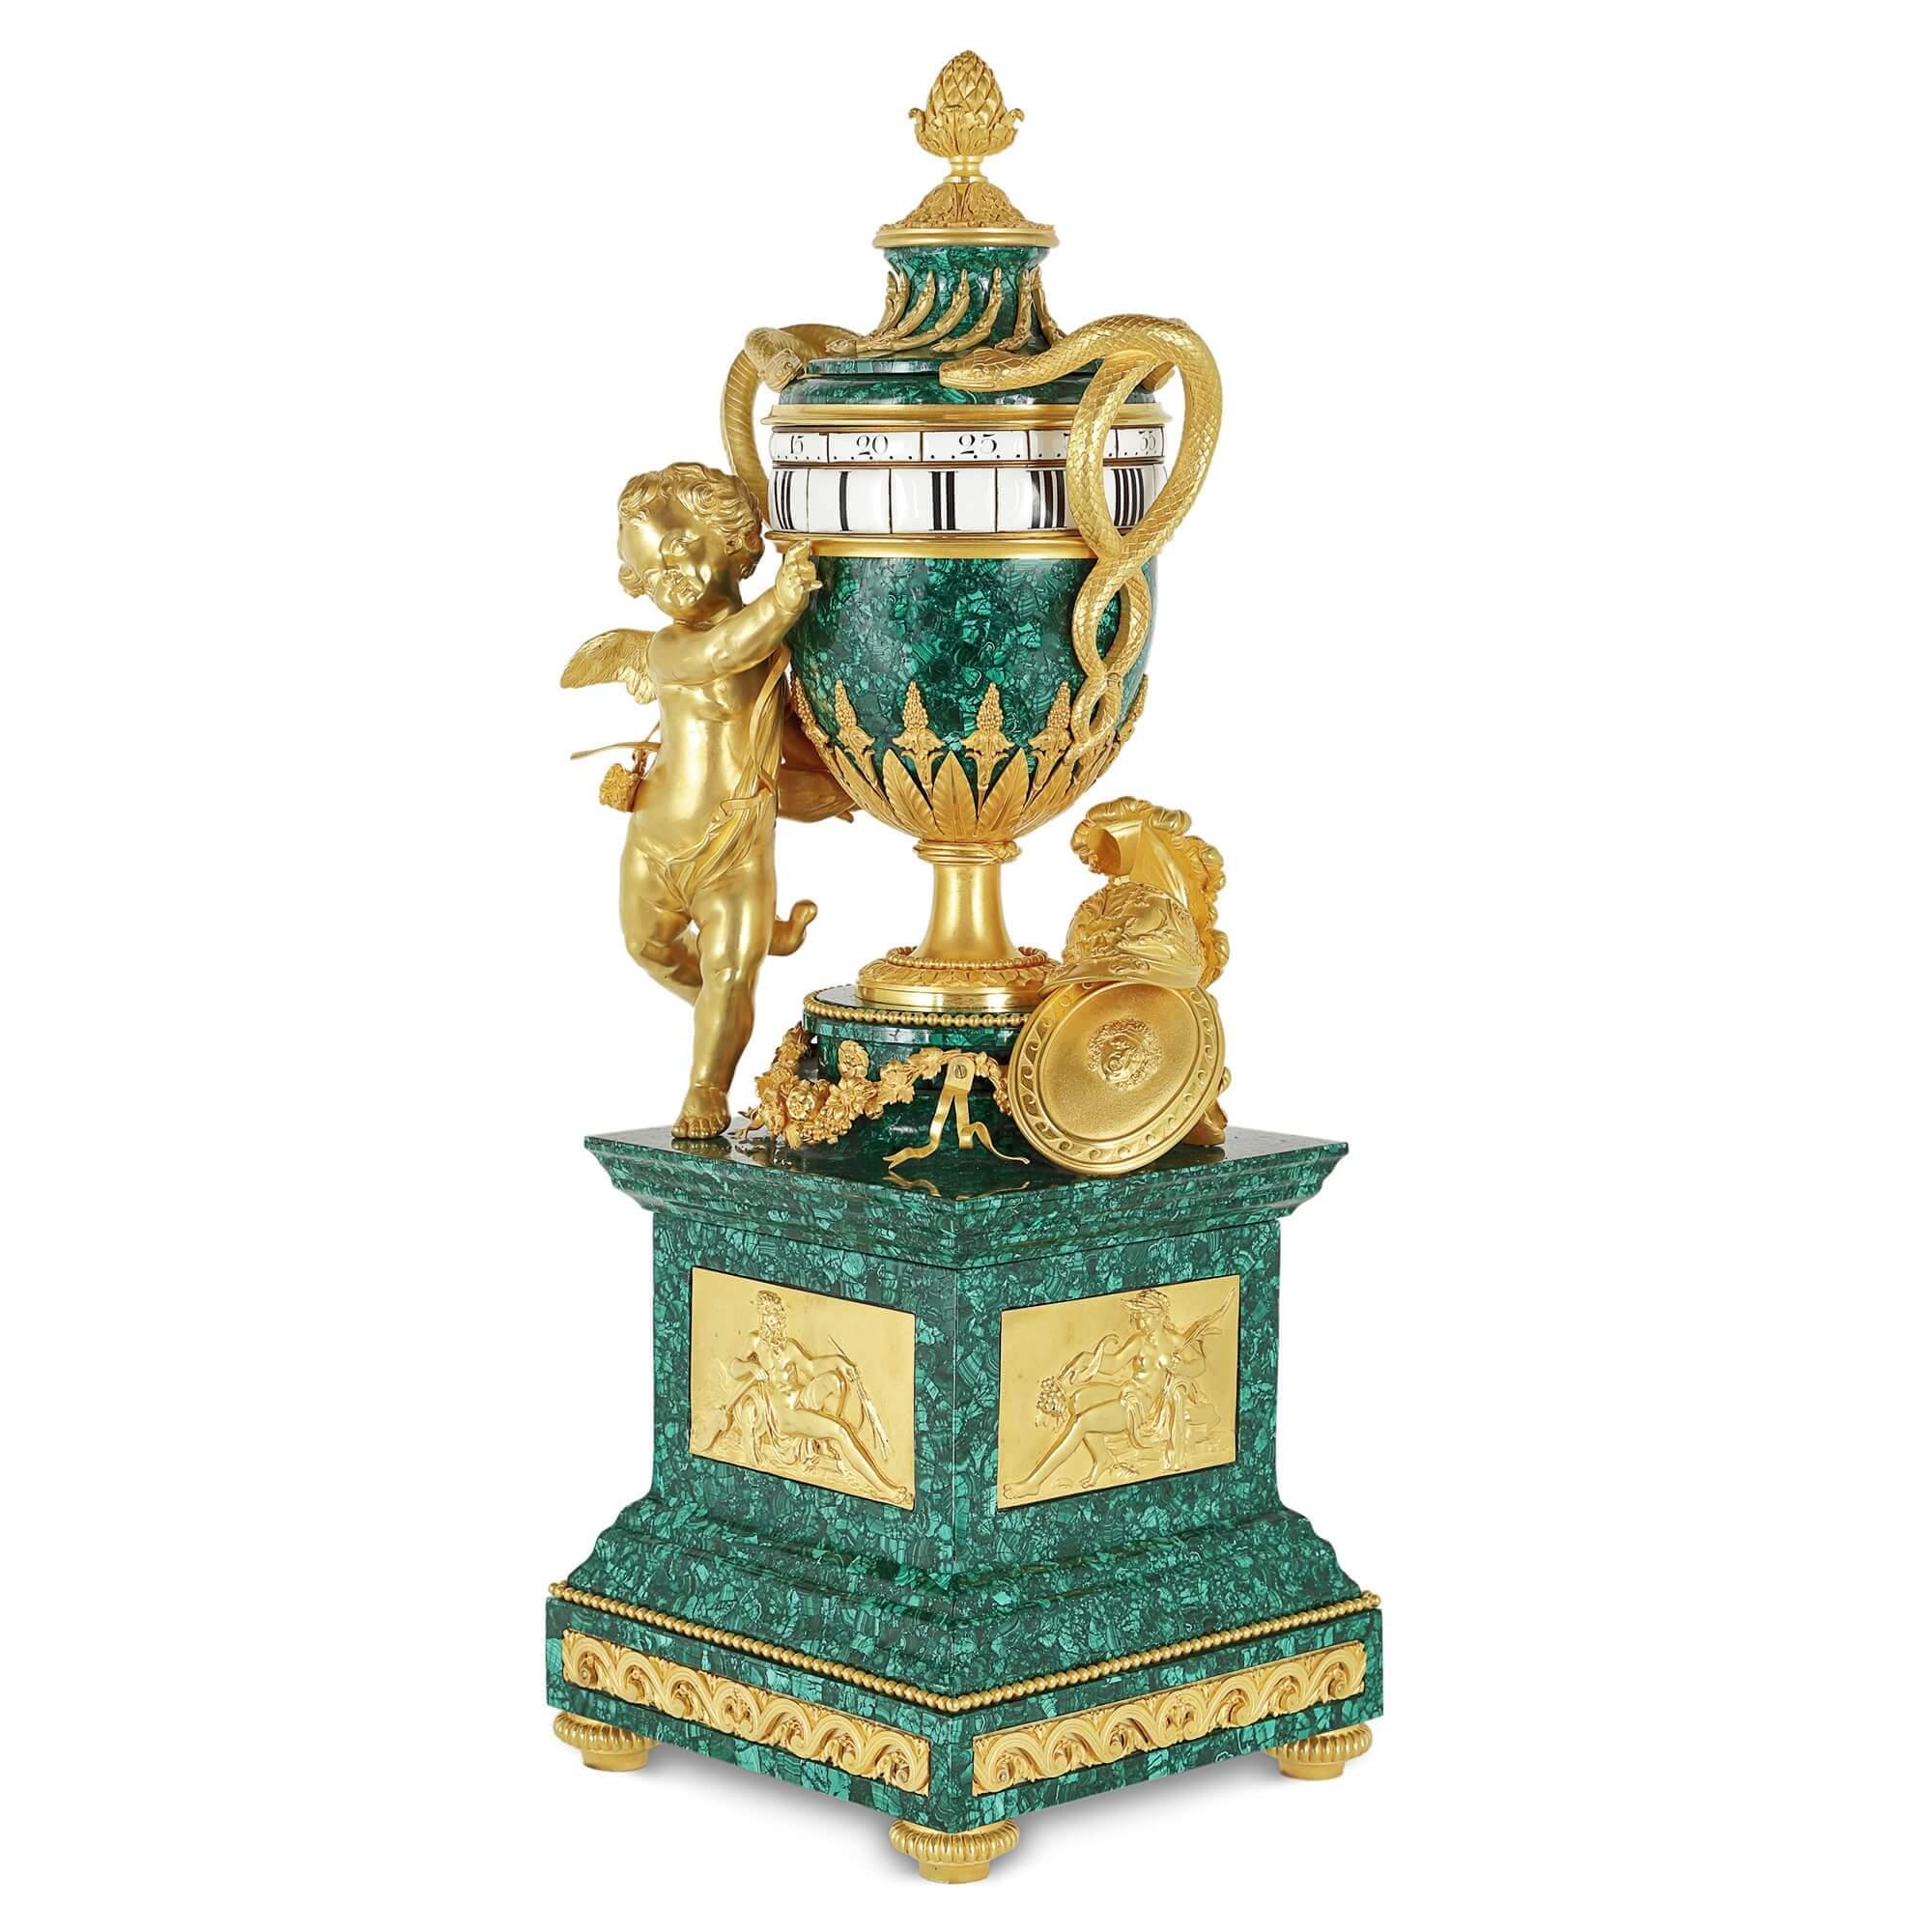 Antique French gilt bronze mounted malachite turning mantel clock
French, late 19th century
Measures: Height 75cm, width 28cm, depth 25.5cm

The malachite mantel clock case is styled like a classical amphora vase, which stands on a gilt bronze